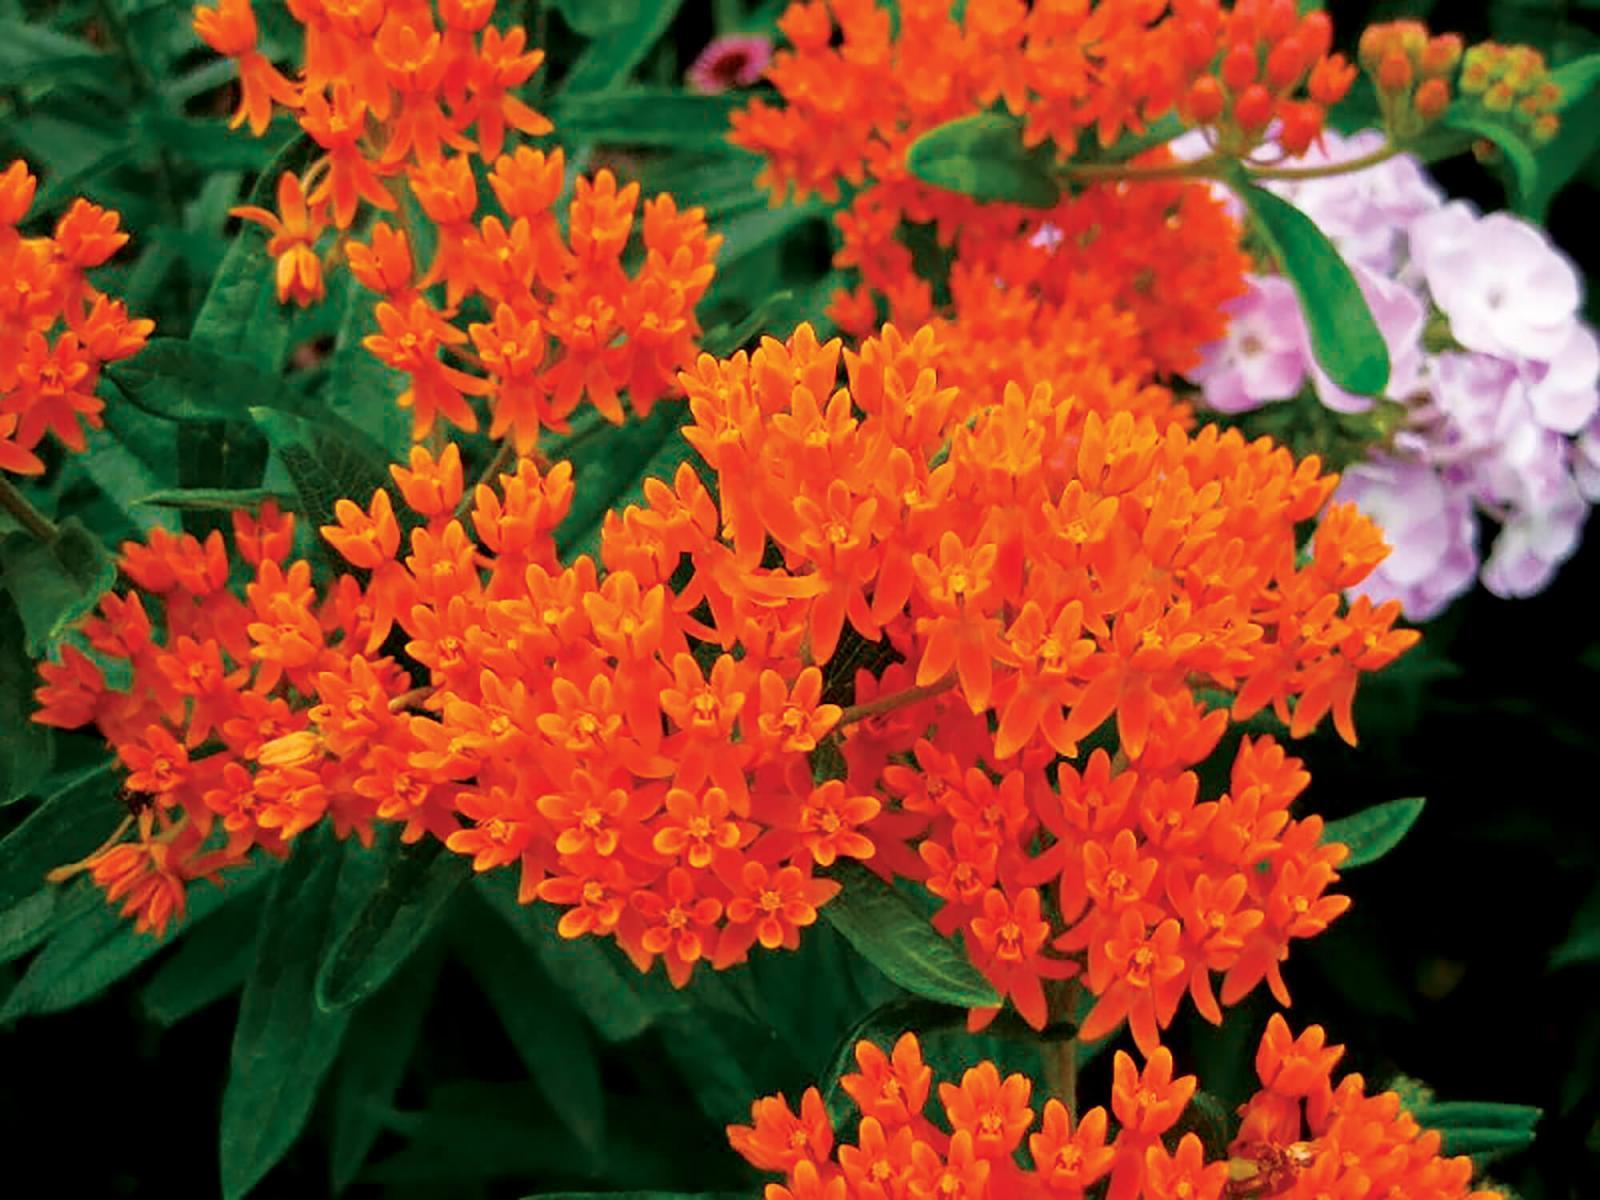 Butterfly weed is the 2017 Perennial Plant of the Year.